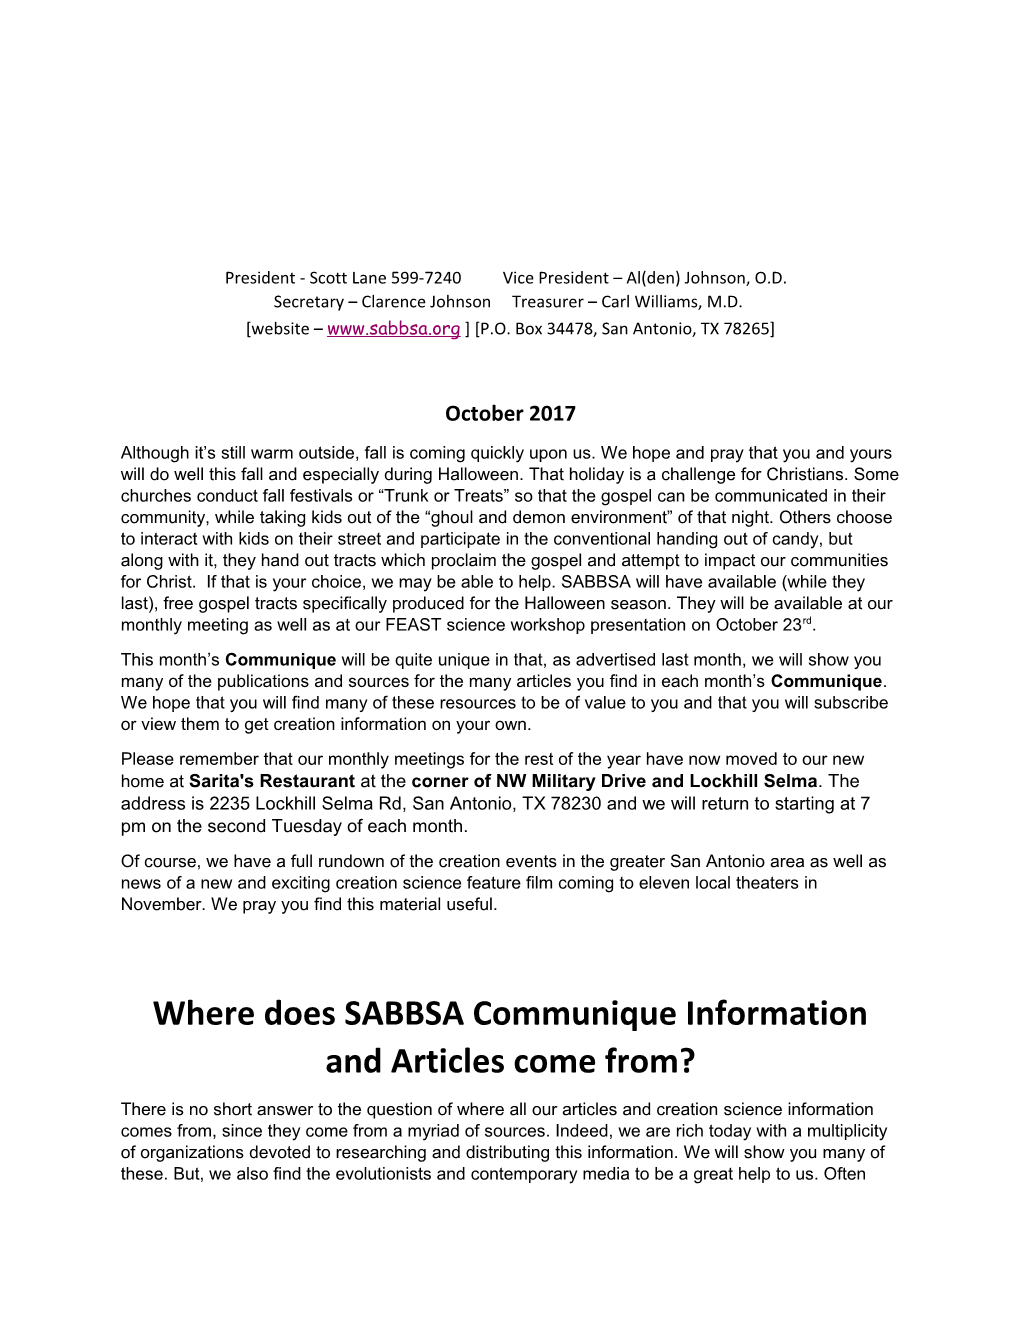 Where Does SABBSA Communique Information and Articles Come From?